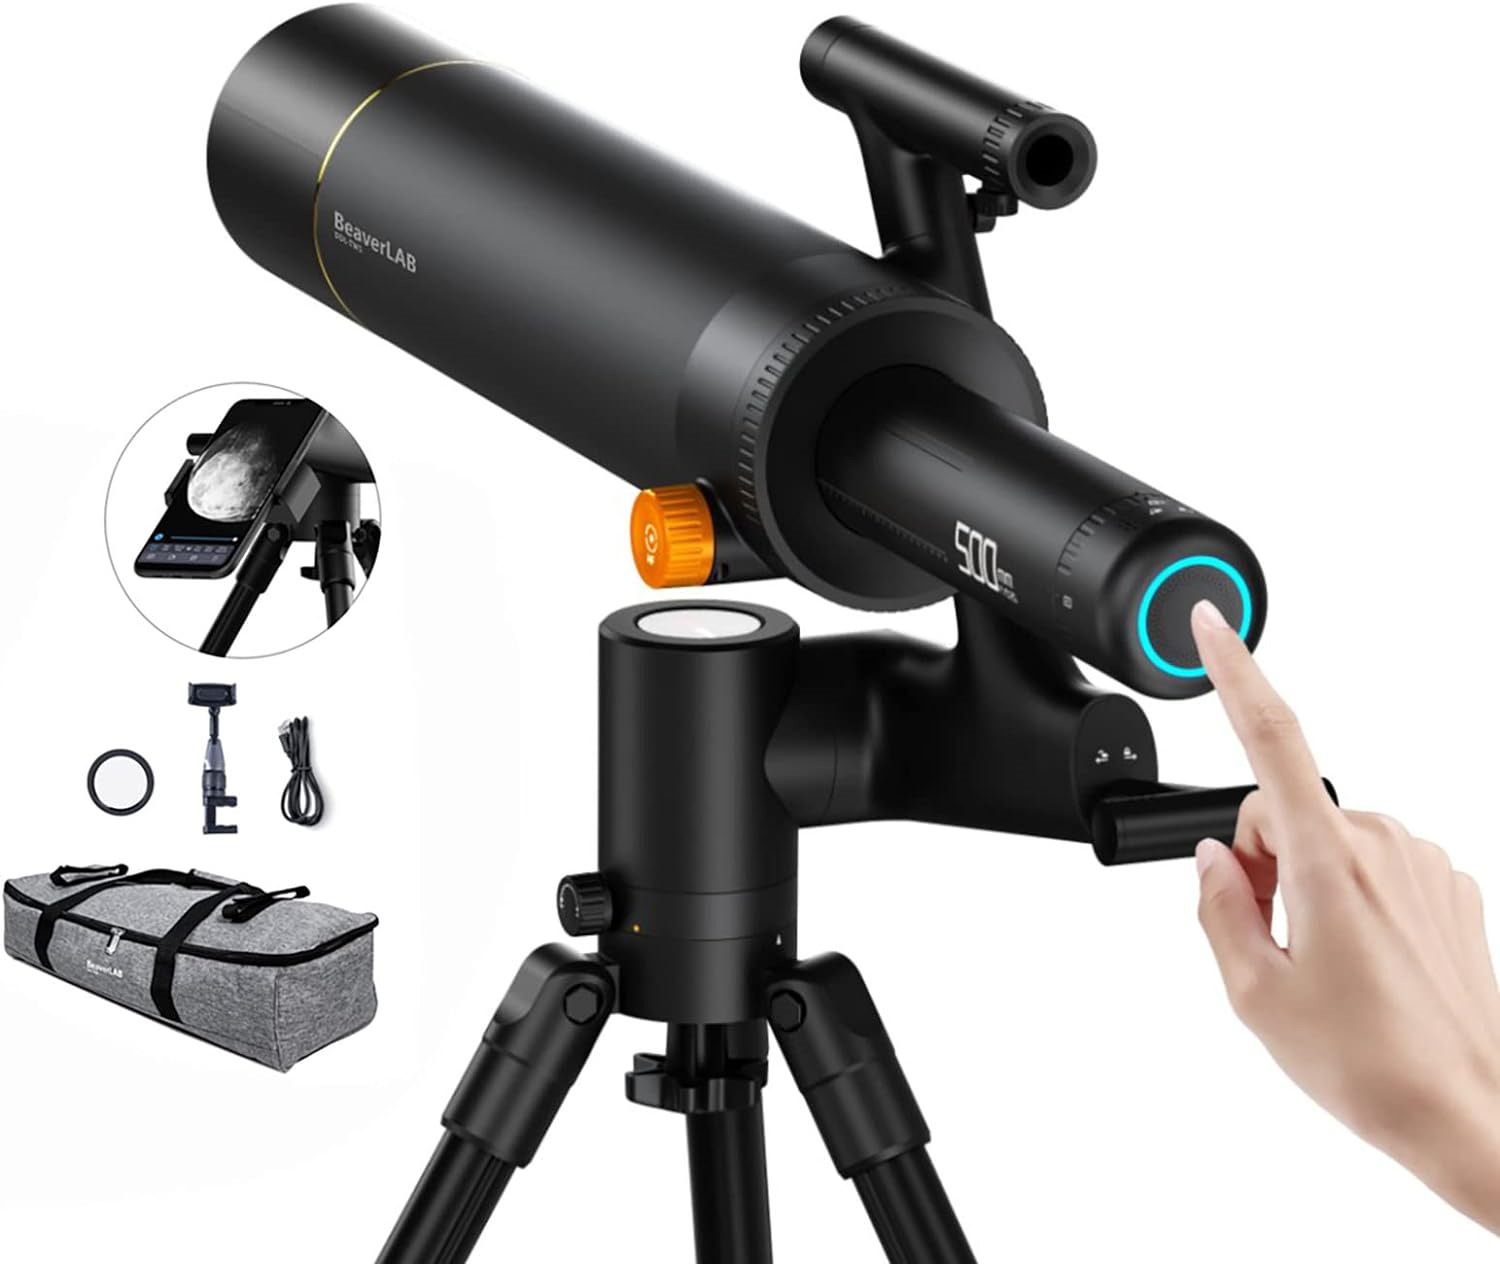 TW1 Smart Digital Astronomy Telescope, 500mm Long Focal Length, Compact and HD